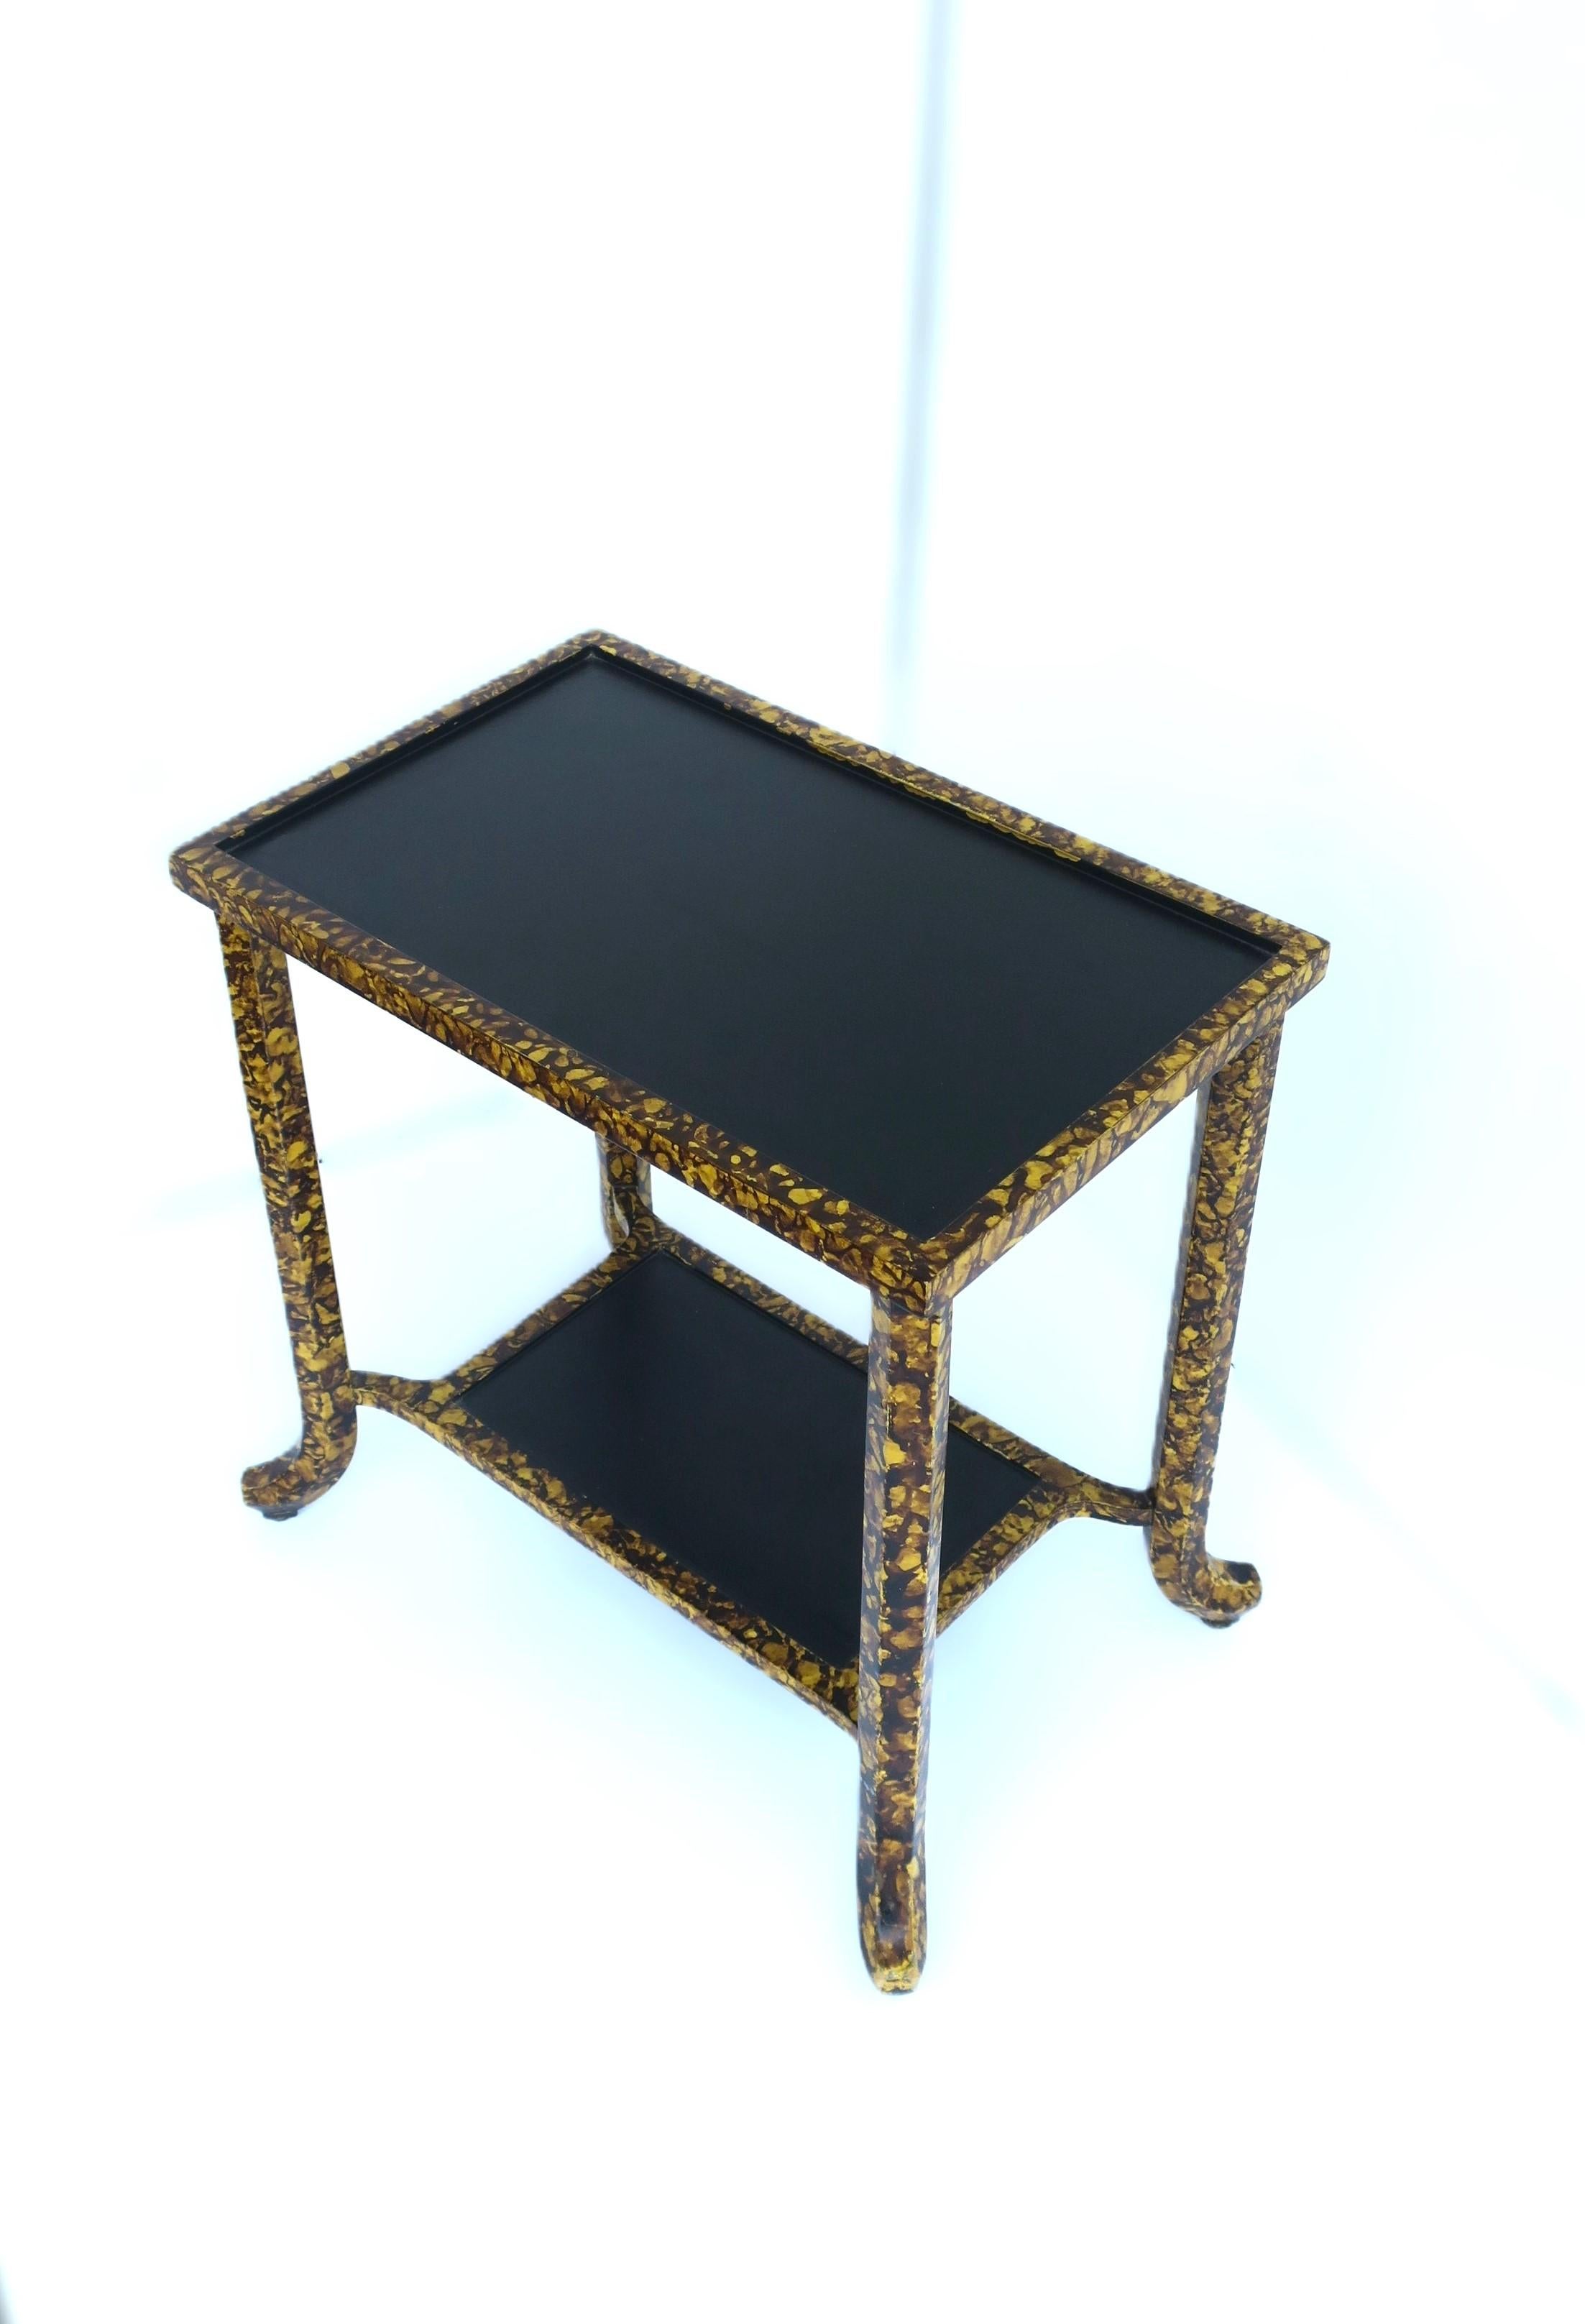 A telephone table/end table with lower shelf. Tables' top and shelf areas are black, edges and legs are black, brown and a golden yellow hue. A nice piece to support a cocktail or coffee/tea, etc., with a shelf area below for a book, etc. Table is